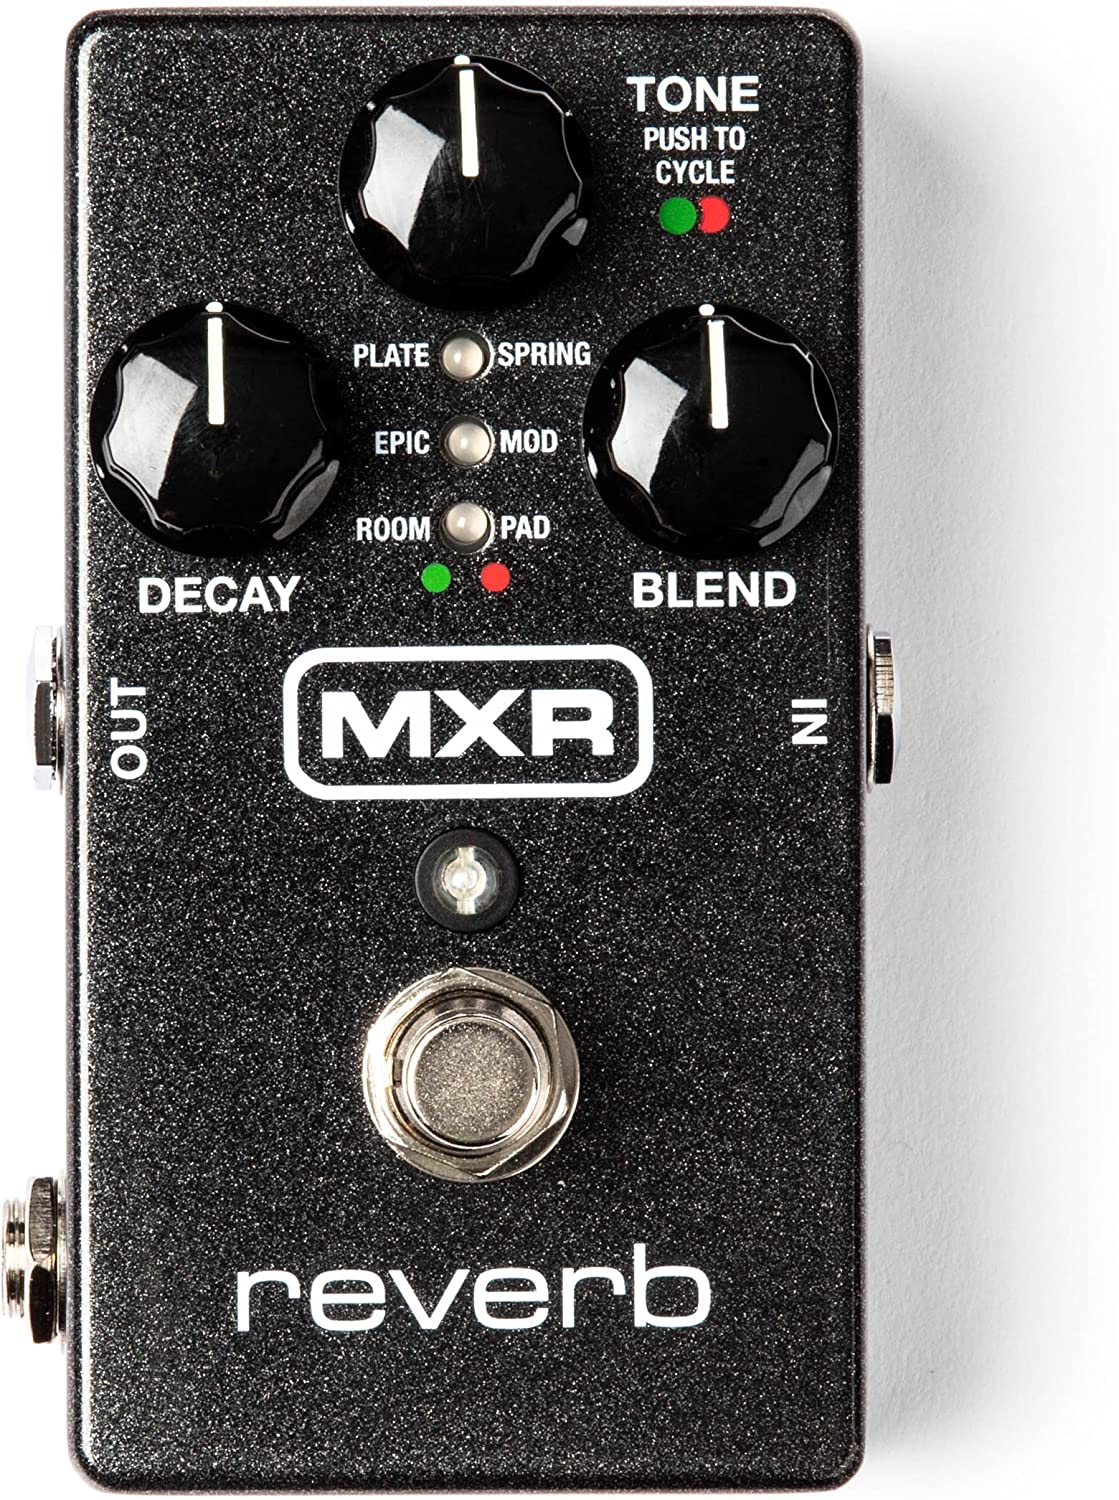 MXR M300 Reverb Guitar Effects Pedal on a white background